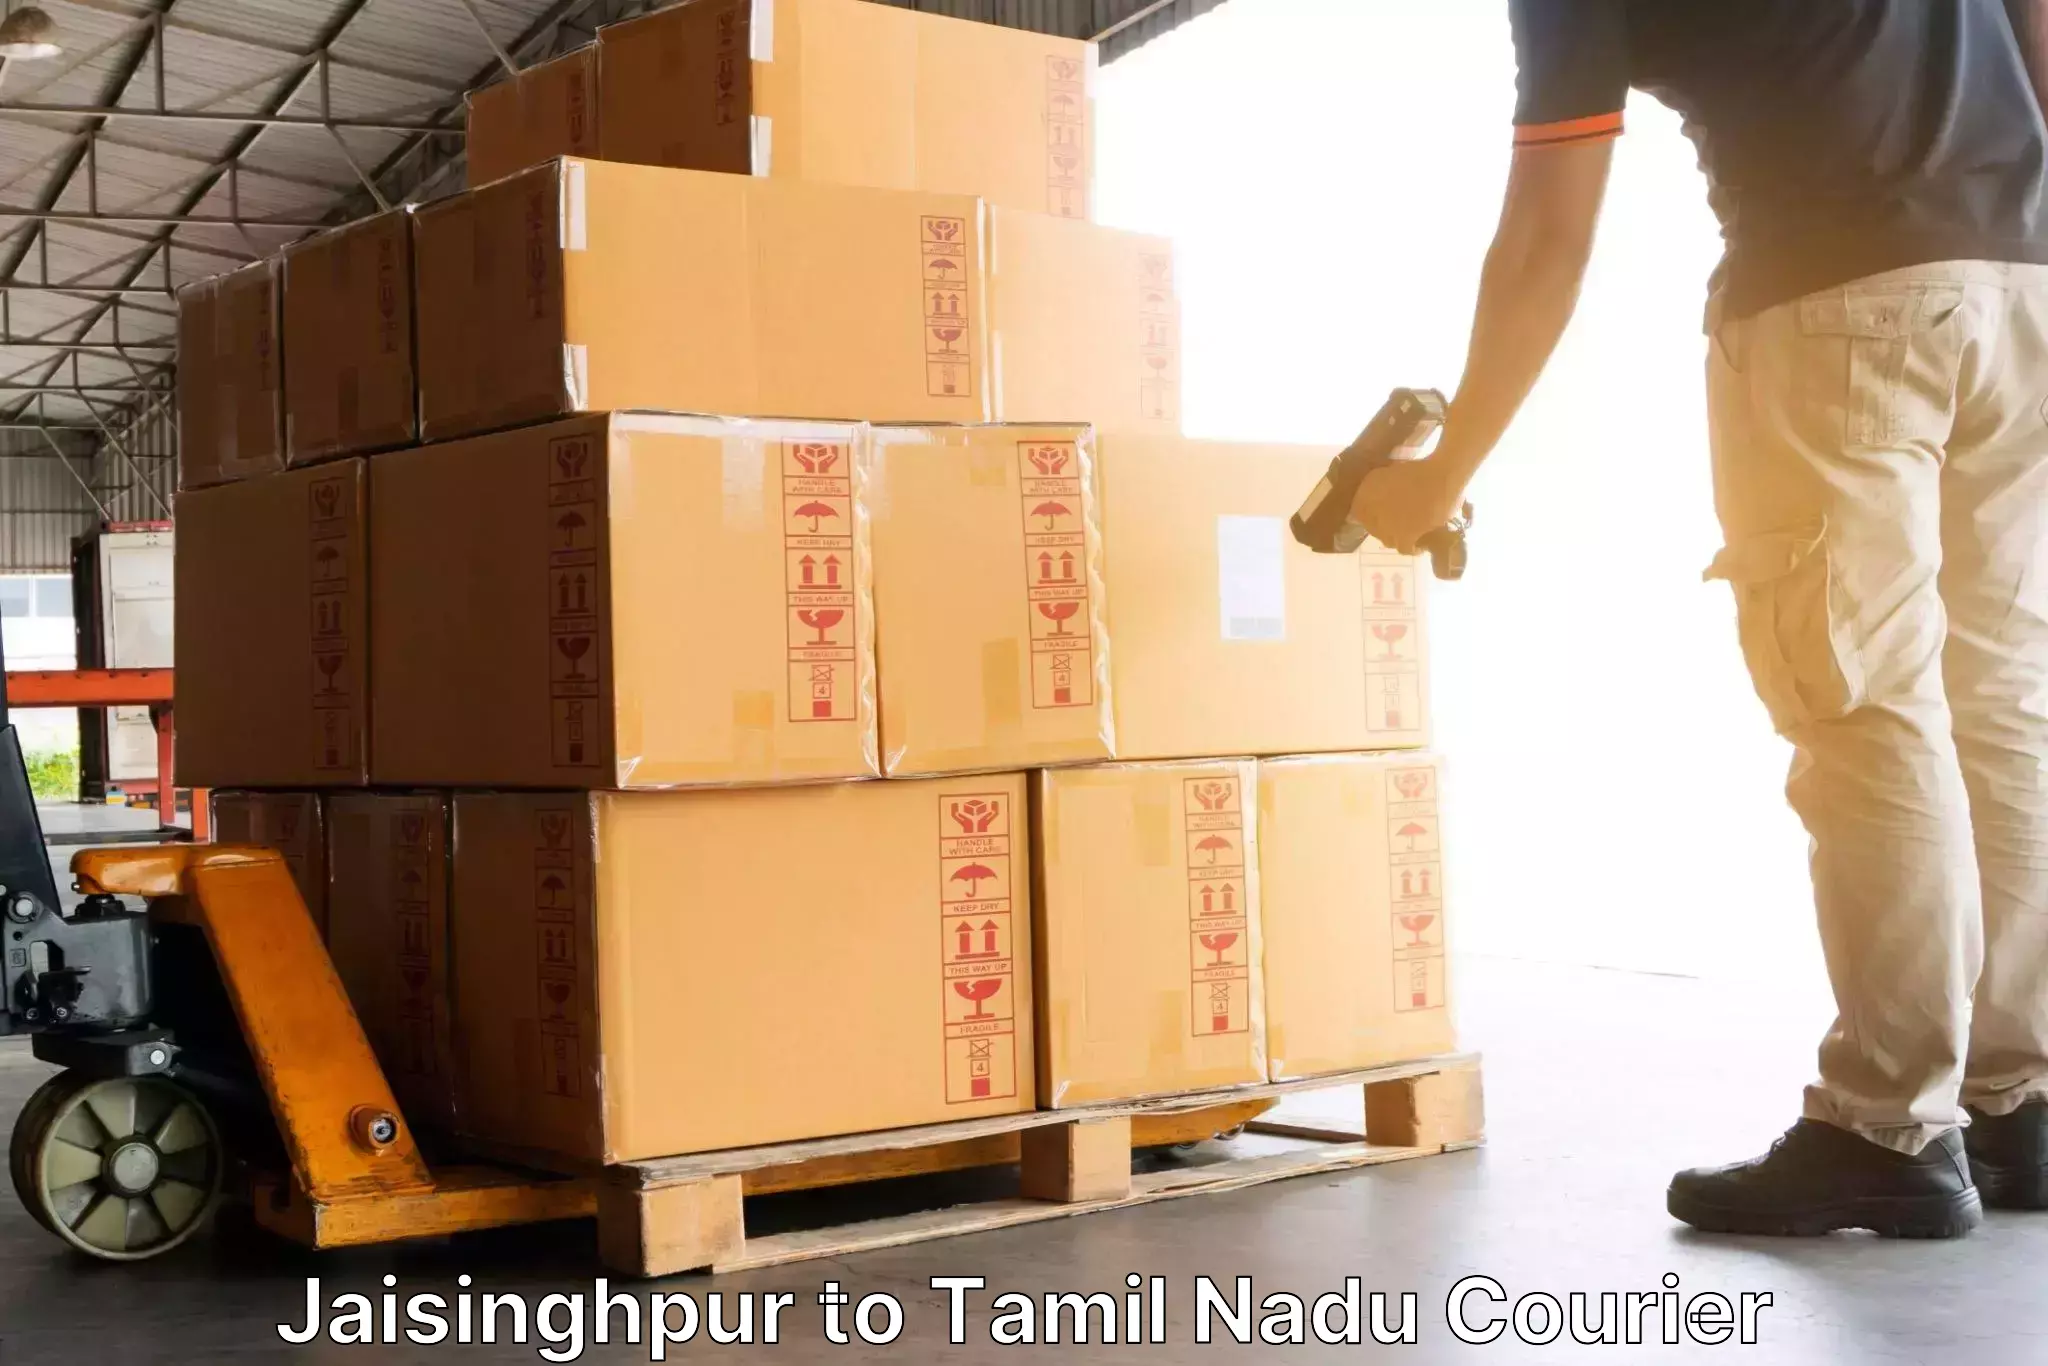 Secure package delivery Jaisinghpur to Chennai Port